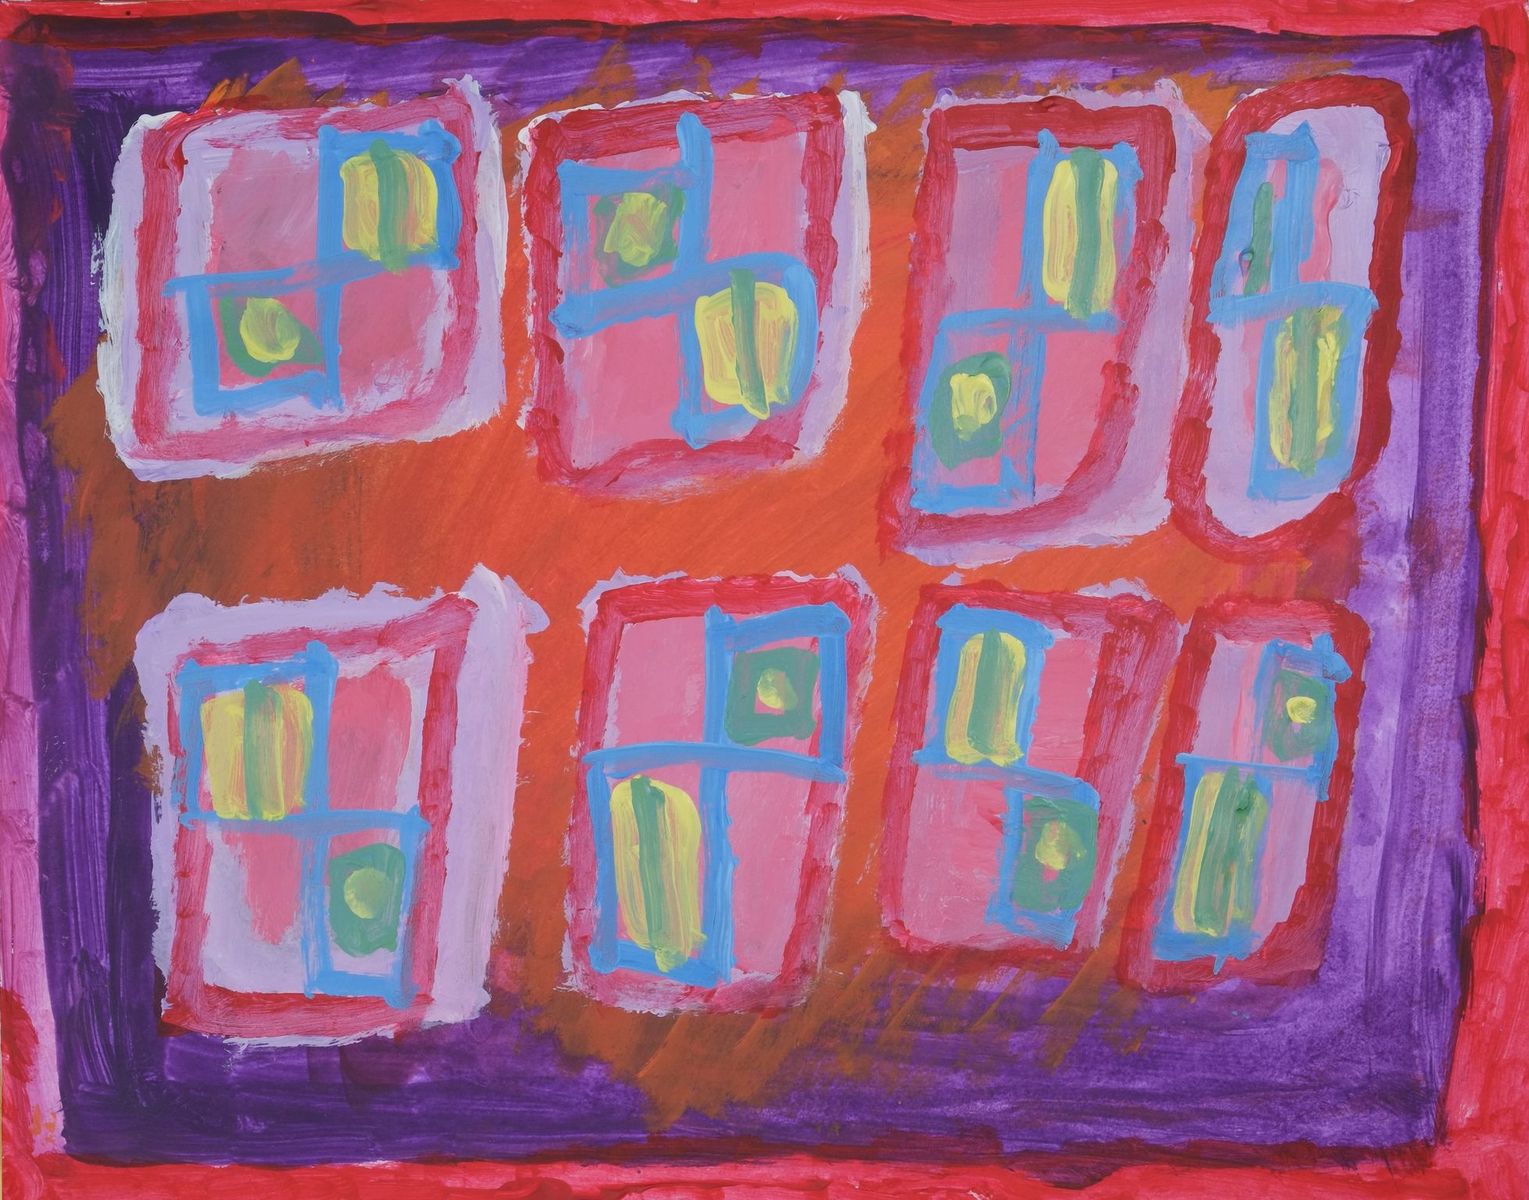 Acrylic on paper artwork depicting red and purple border with 8 squares inside depicting lavender and red outlines with blue, yellow and green insides